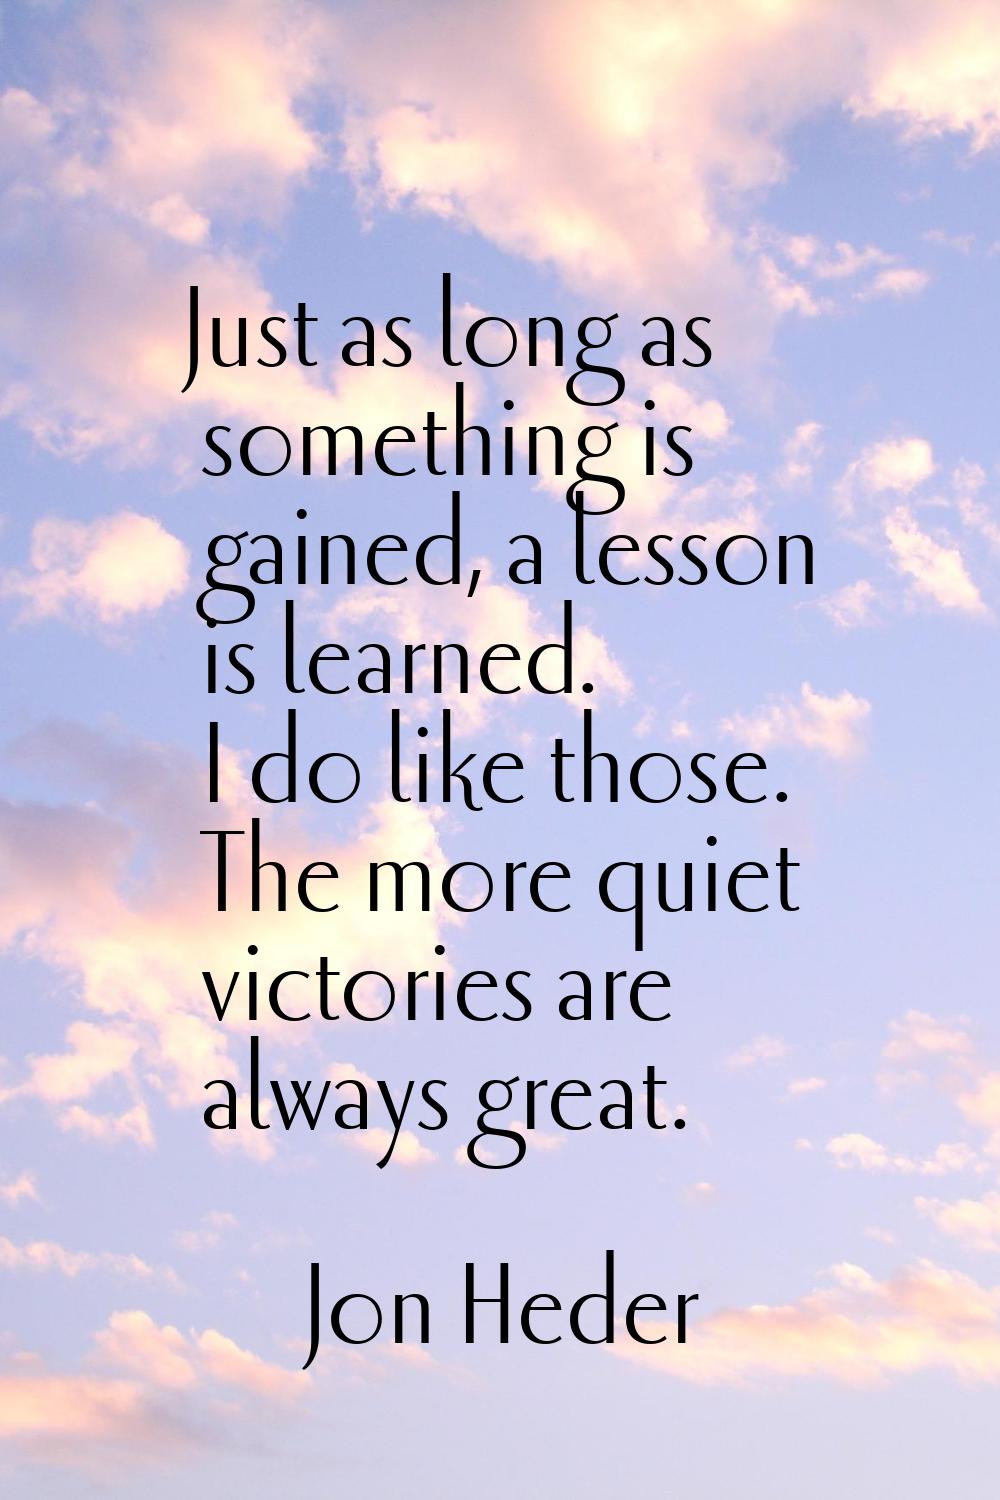 Just as long as something is gained, a lesson is learned. I do like those. The more quiet victories